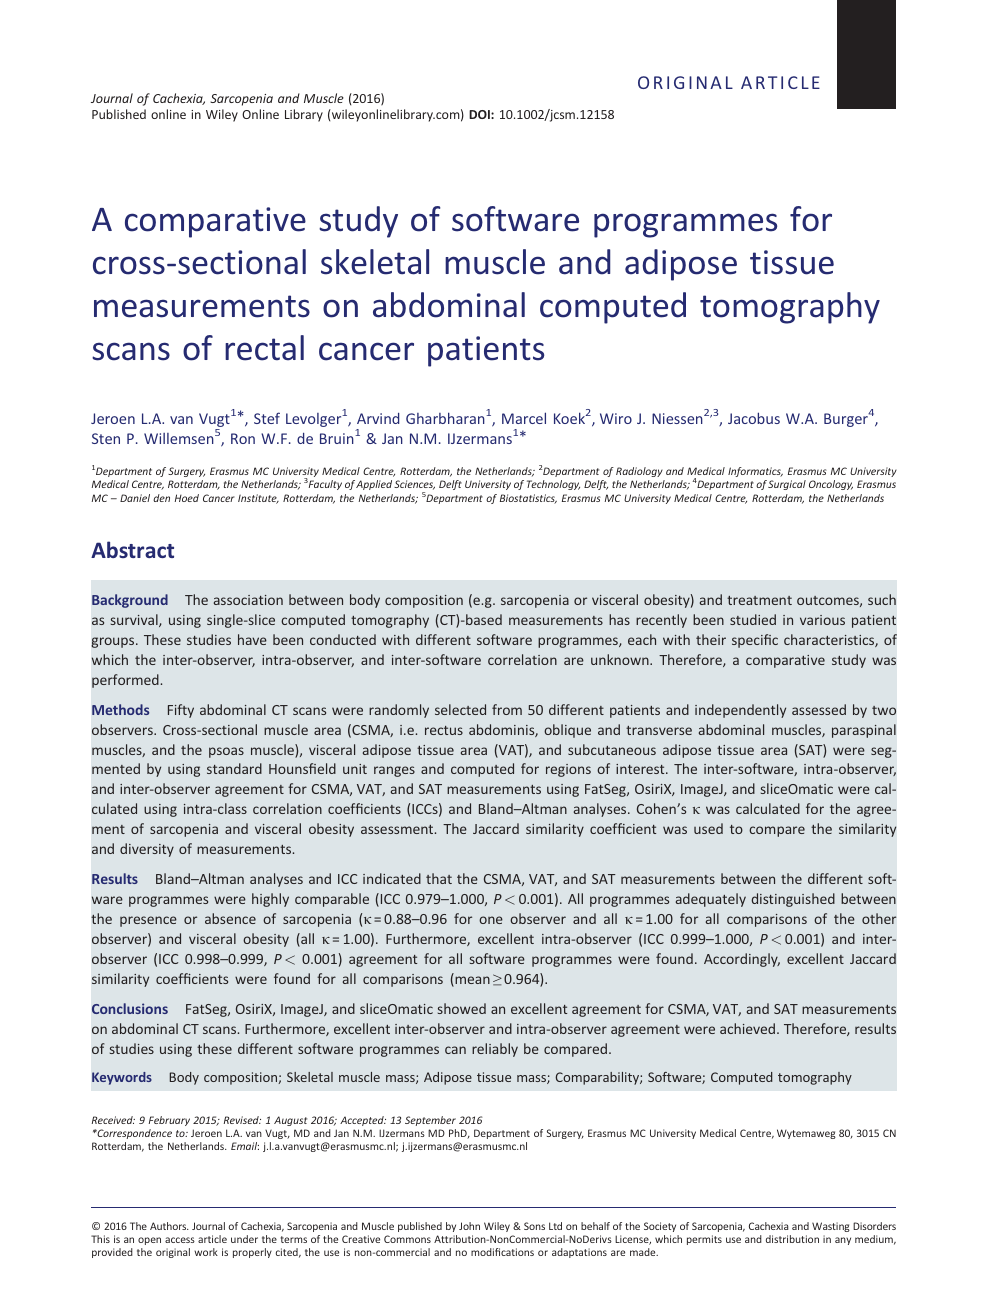 A Comparative Study Of Software Programmes For Cross Sectional Skeletal Muscle And Adipose Tissue Measurements On Abdominal Computed Tomography Scans Of Rectal Cancer Patients Topic Of Research Paper In Clinical Medicine Download